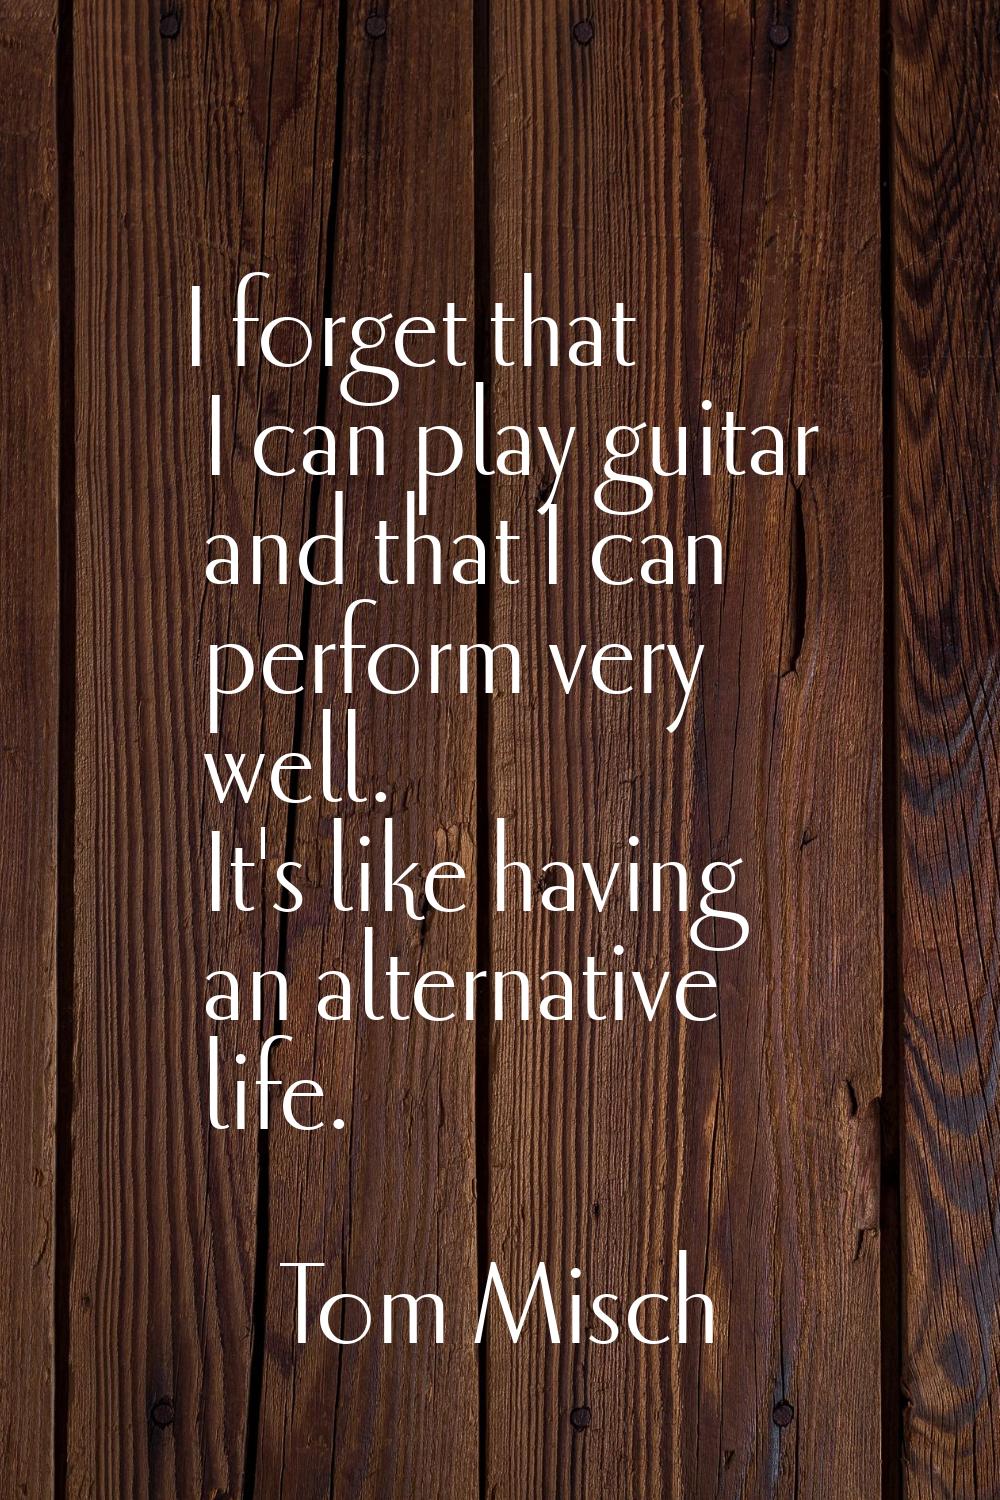 I forget that I can play guitar and that I can perform very well. It's like having an alternative l